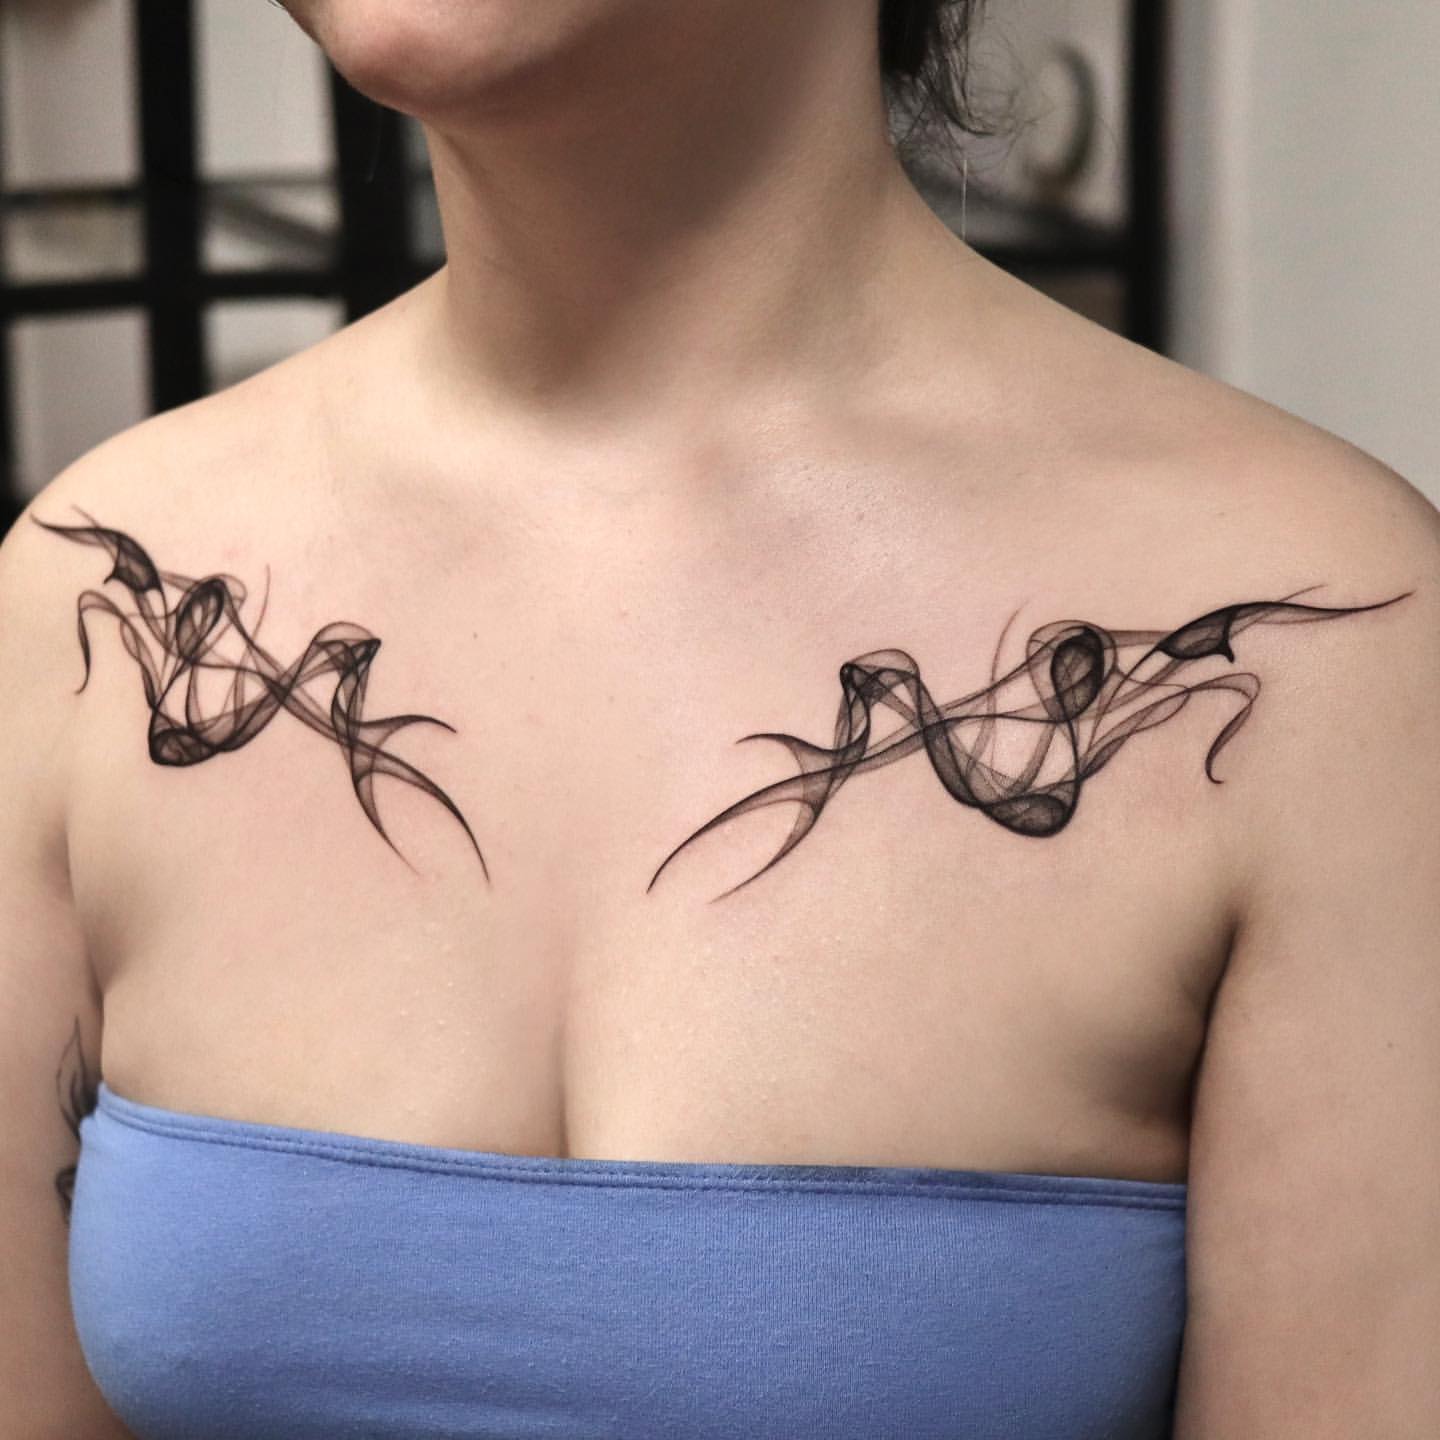 Chest Tattoos Ideas for Women 33